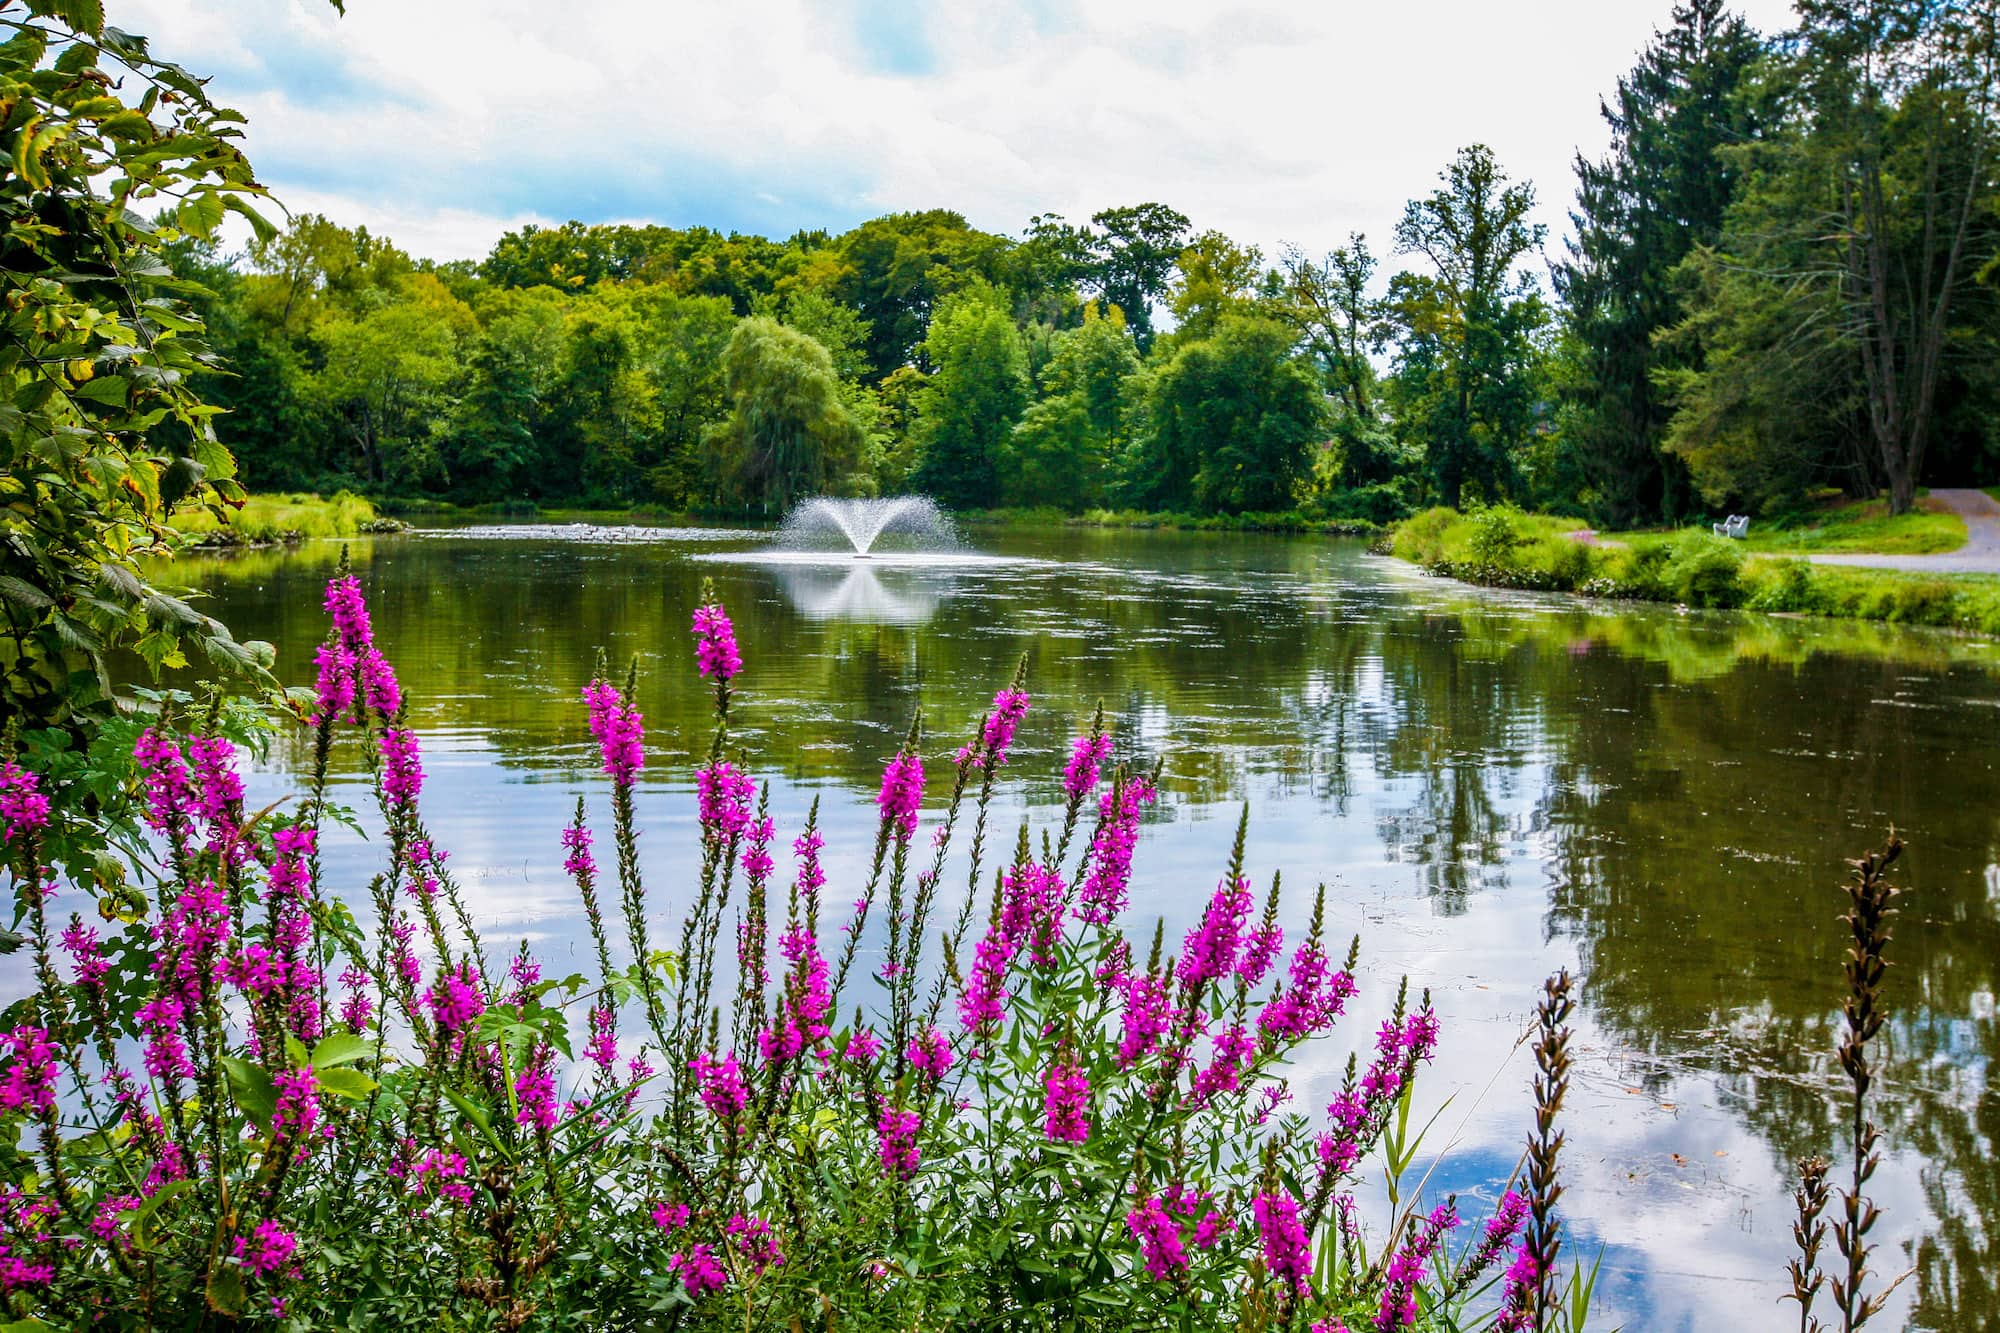 A water feature spouts water in the middle of a lake surrounded by greenery, seen through purple flowers at the edge of the lake.